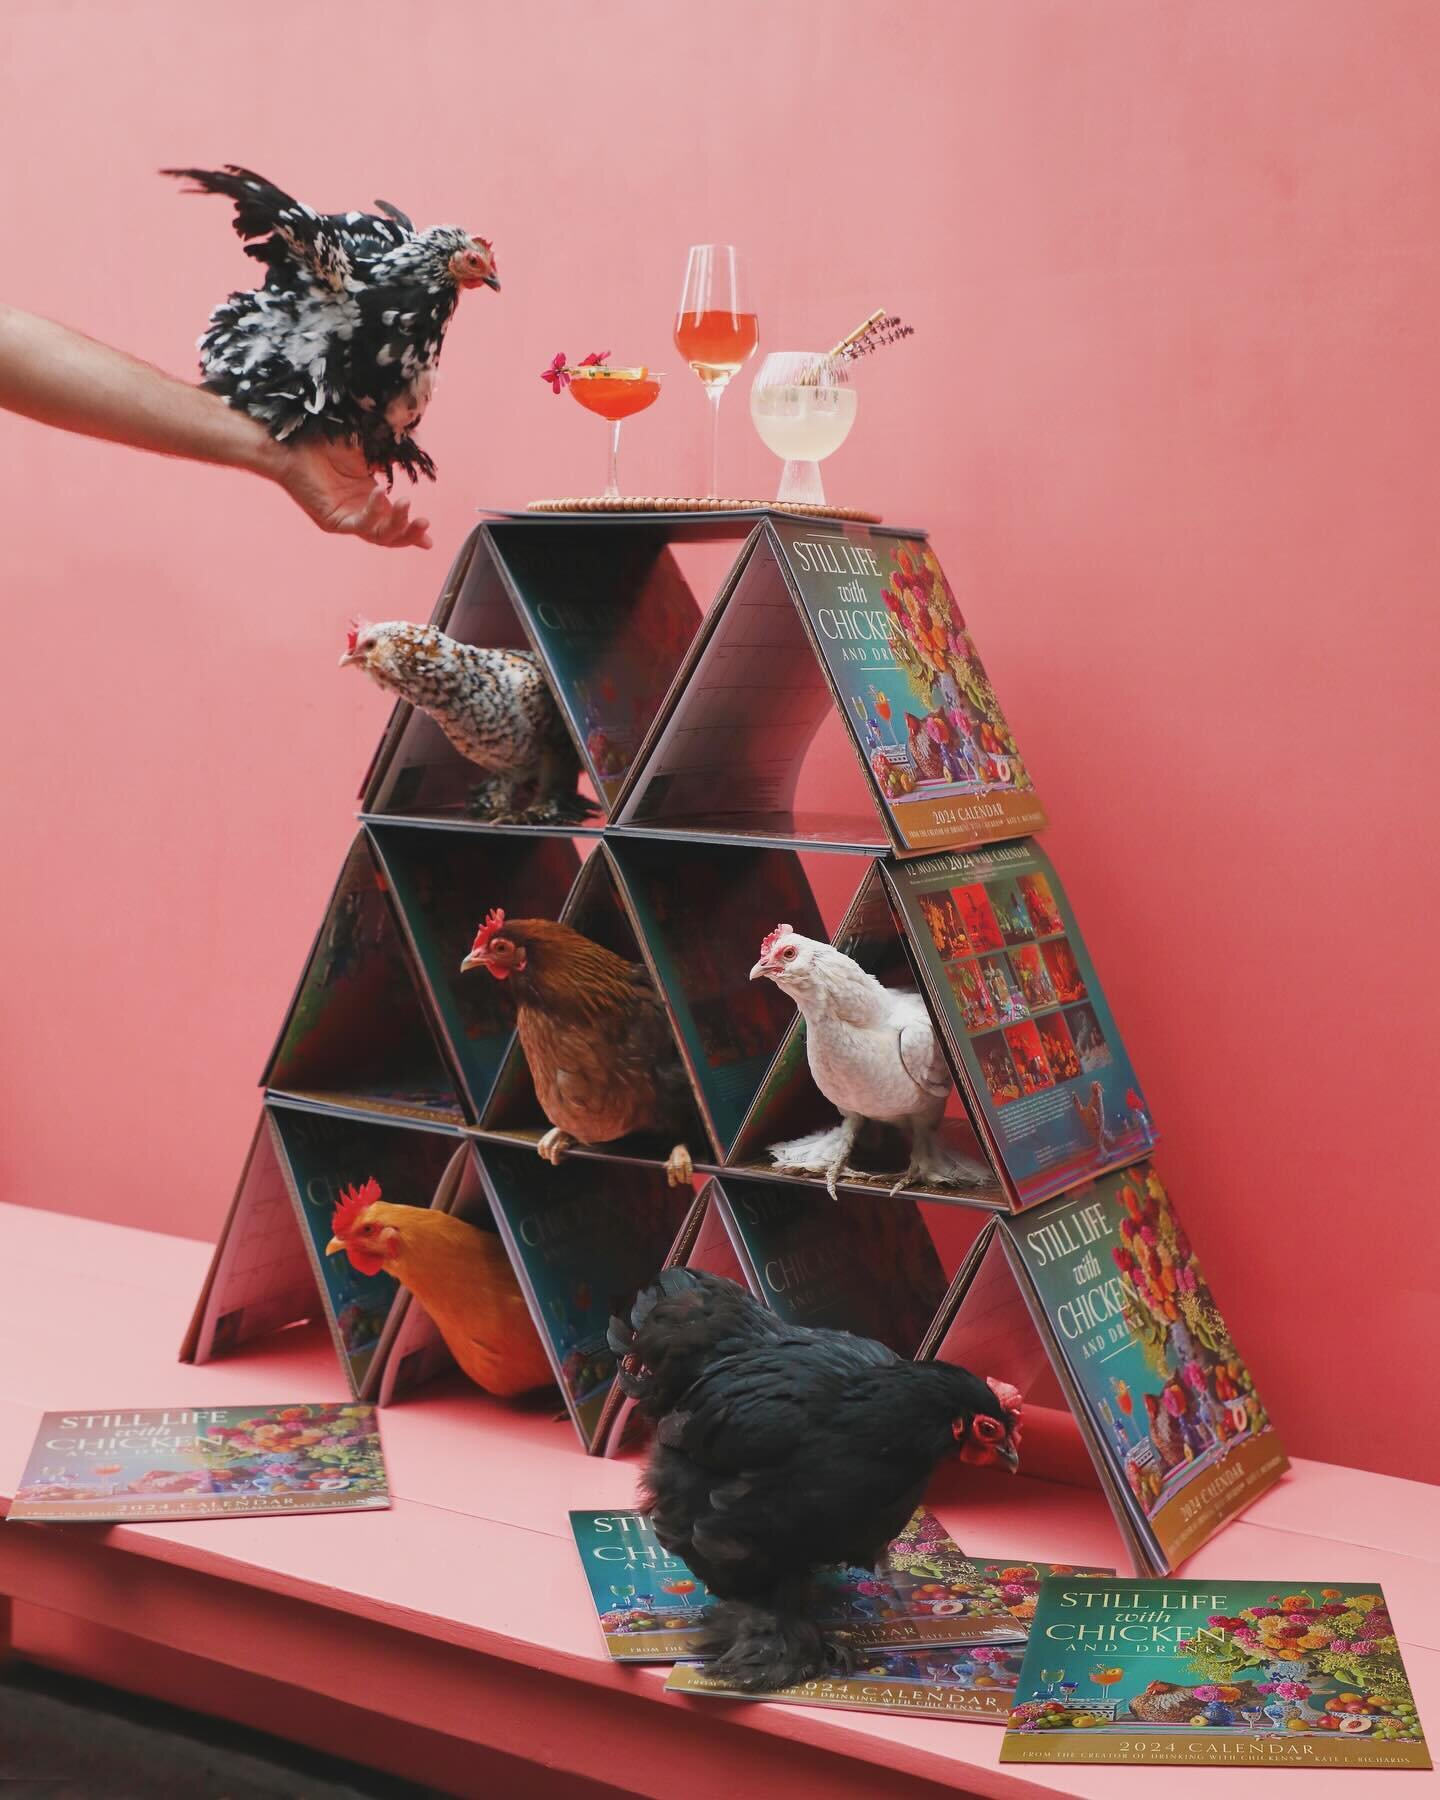 JENGA!!!!
JK it didn't fall because we reinforced it with packing tape. #safetyfirst
Also, in case you missed it...our 2024 Still Life with Chicken and Drink wall calendars are out and make great gifts (tomorrow is the last day we're shipping until t